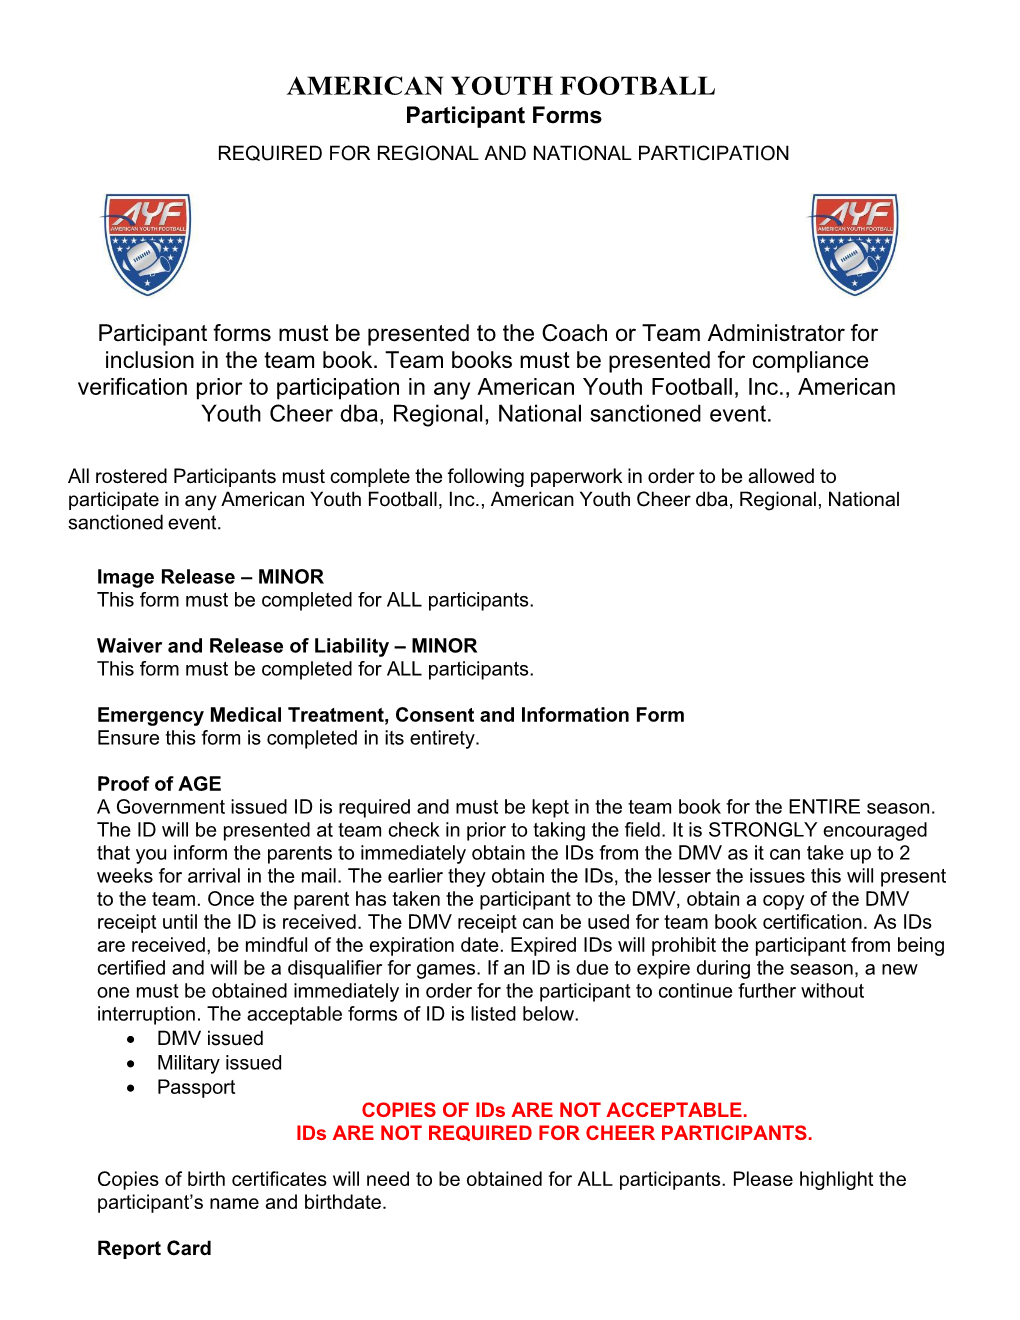 AMERICAN YOUTH FOOTBALL Participant Forms REQUIRED for REGIONAL and NATIONAL PARTICIPATION